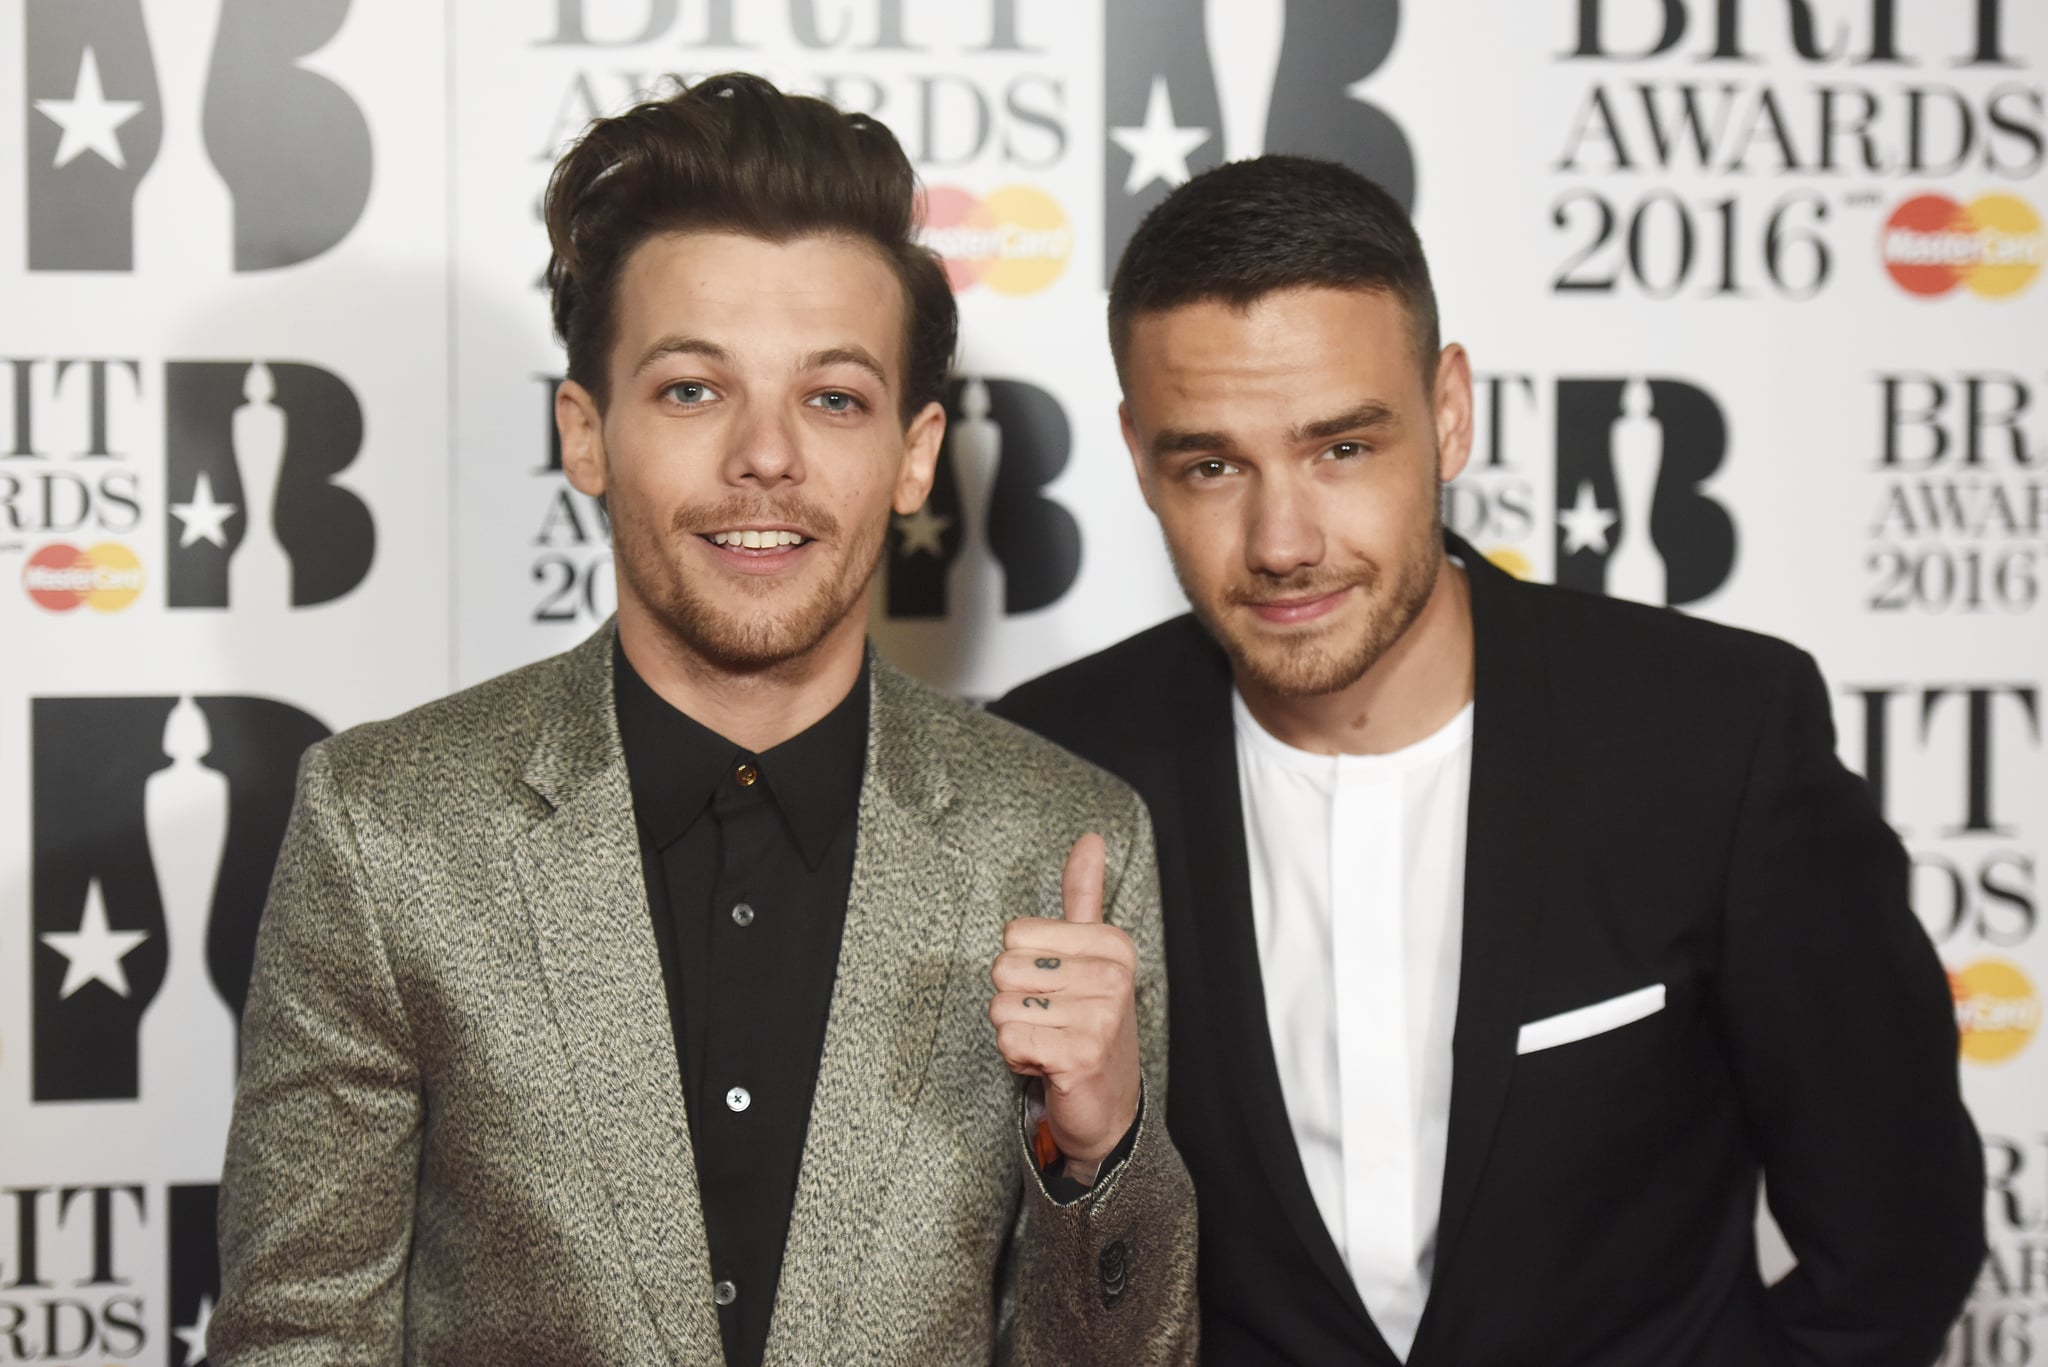 LONDON, ENGLAND - FEBRUARY 24: (EDITORIAL USE ONLY)  Louis Tomlinson (L) and Liam Payne attend the BRIT Awards 2016 at The O2 Arena on February 24, 2016 in London, England.  (Photo by Dave J Hogan/Dave J Hogan/Getty Images)